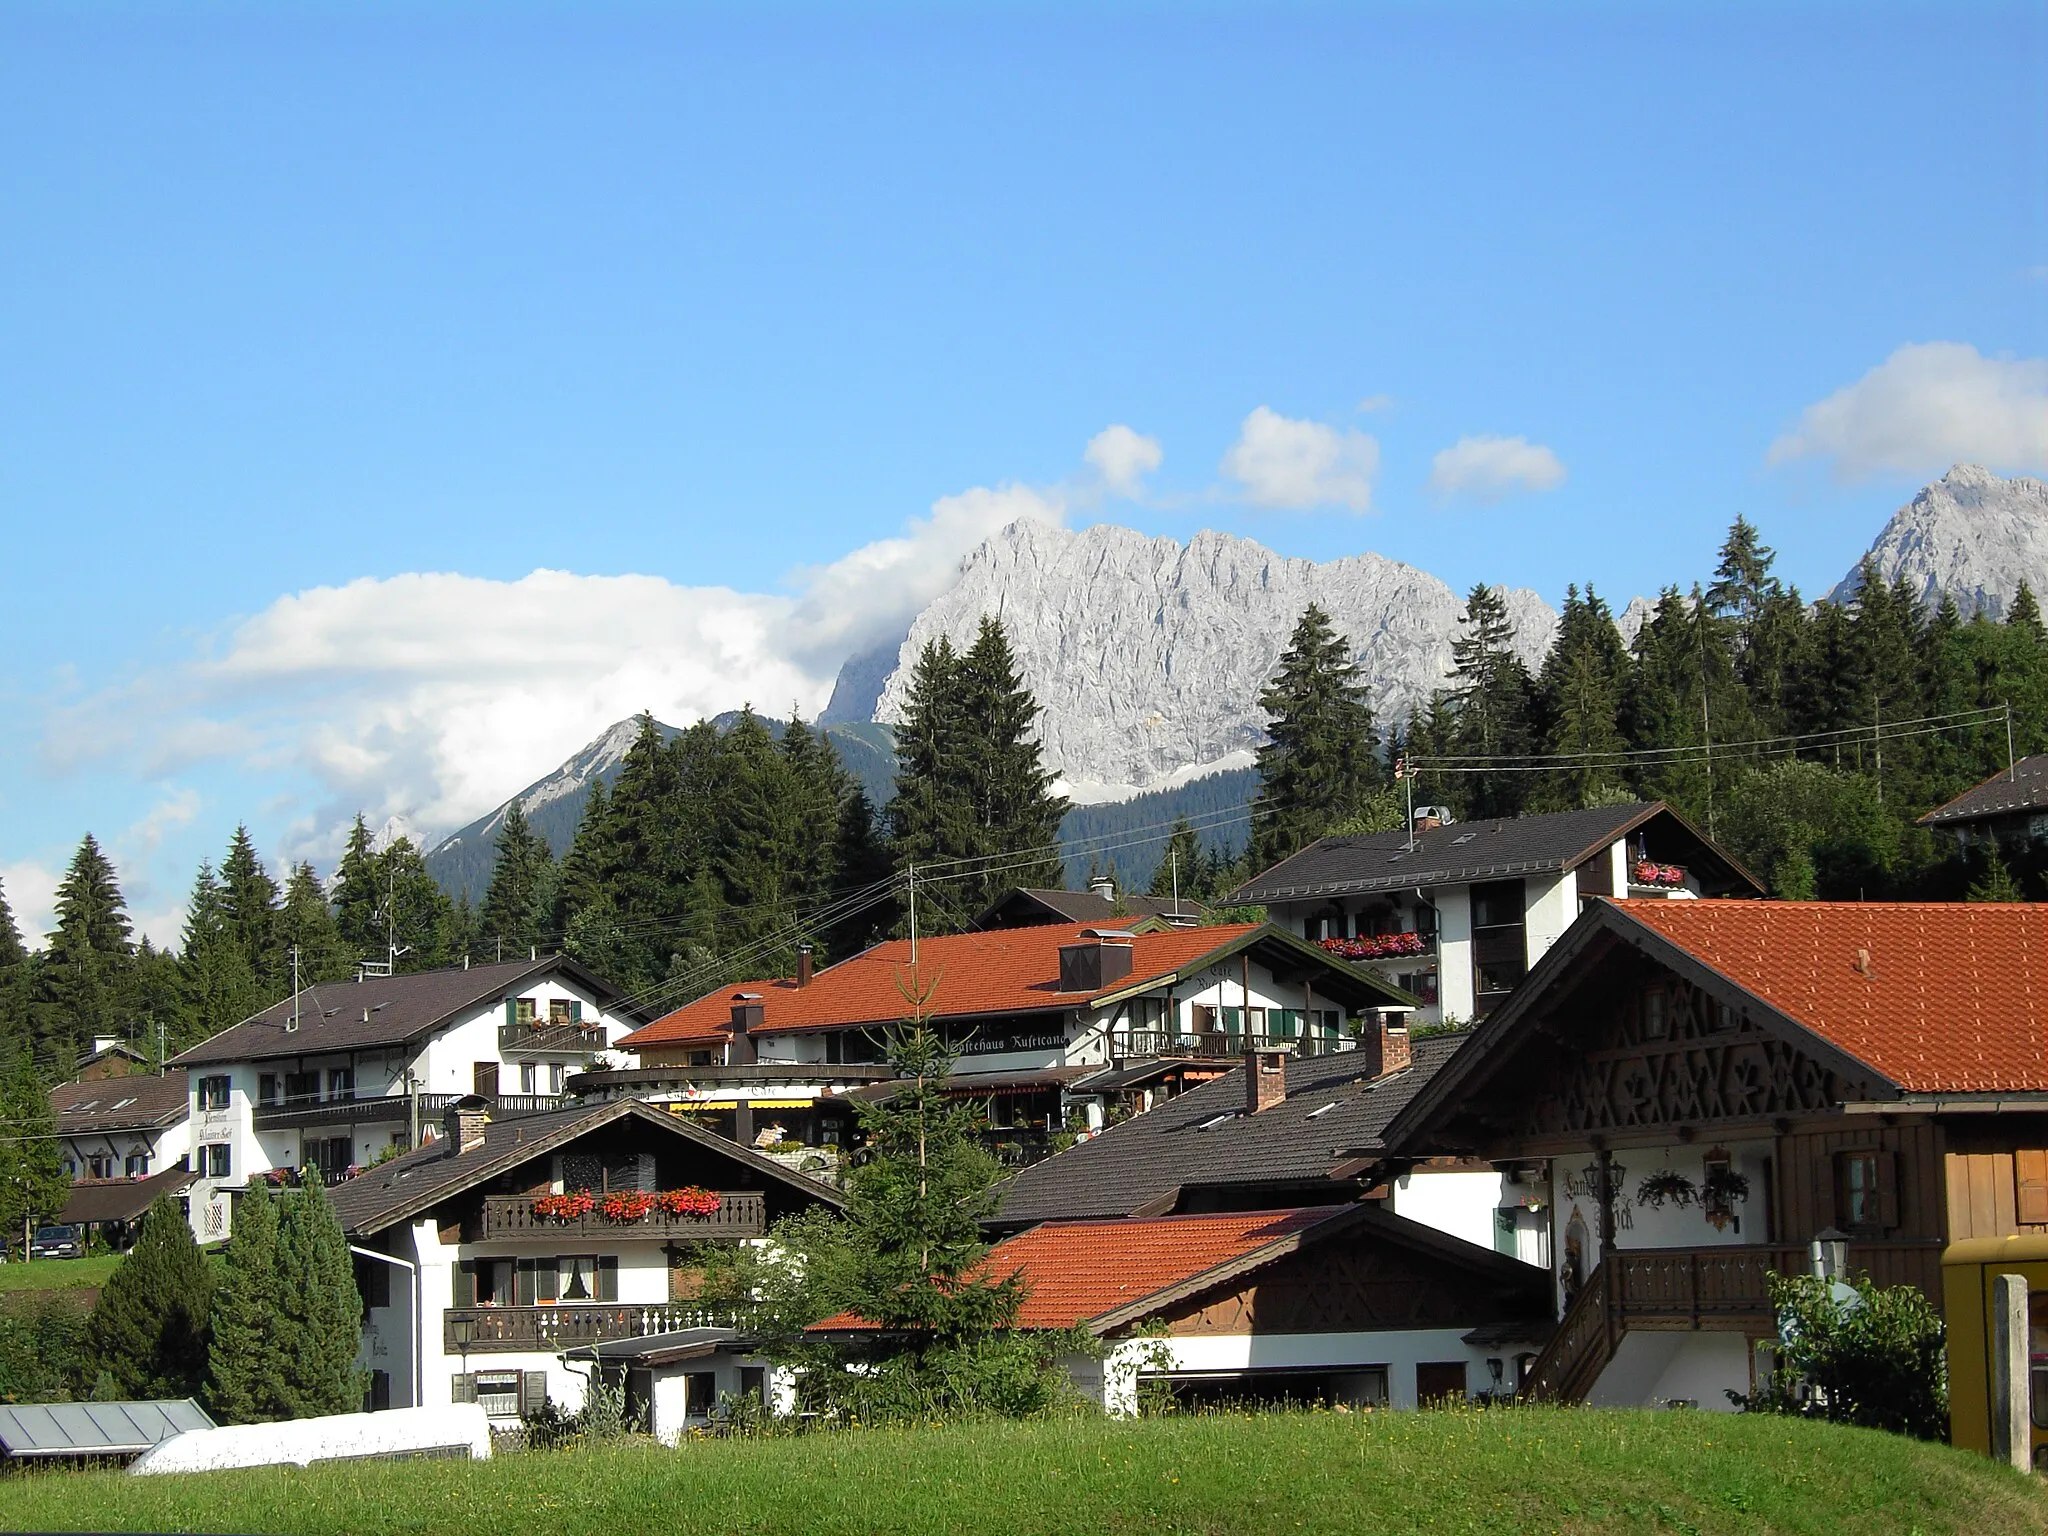 Photo showing: The village Klais near Mittenwald in the "Werdenfelser Land", in the background are the Karwendel mountains